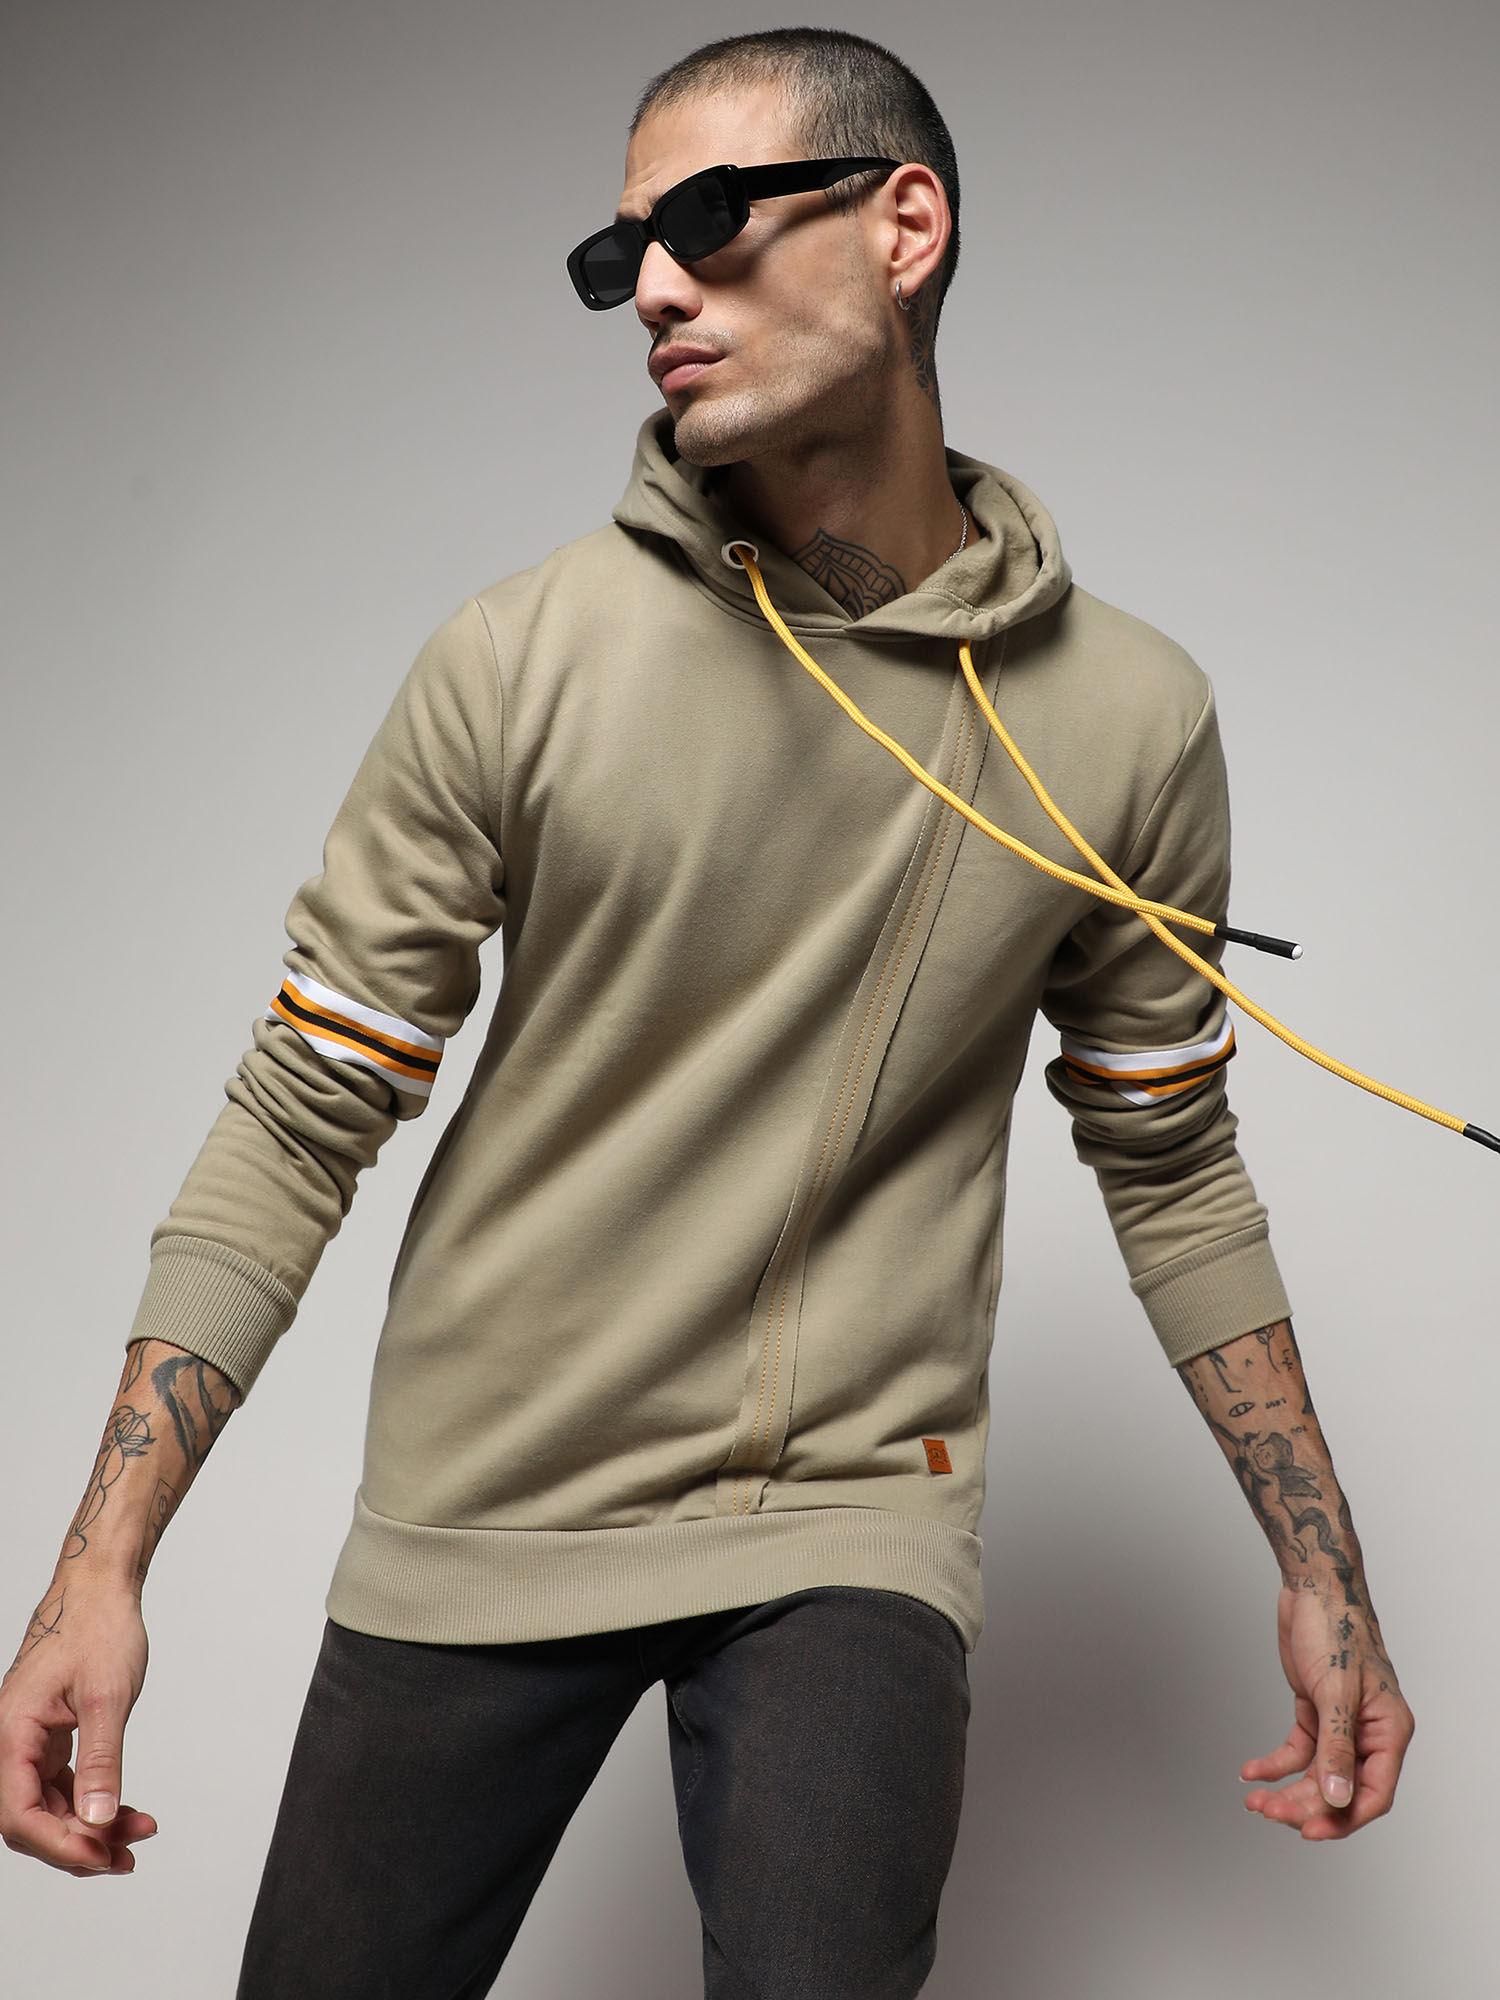 men's-beige-pullover-hoodie-with-contrast-striped-sleeve